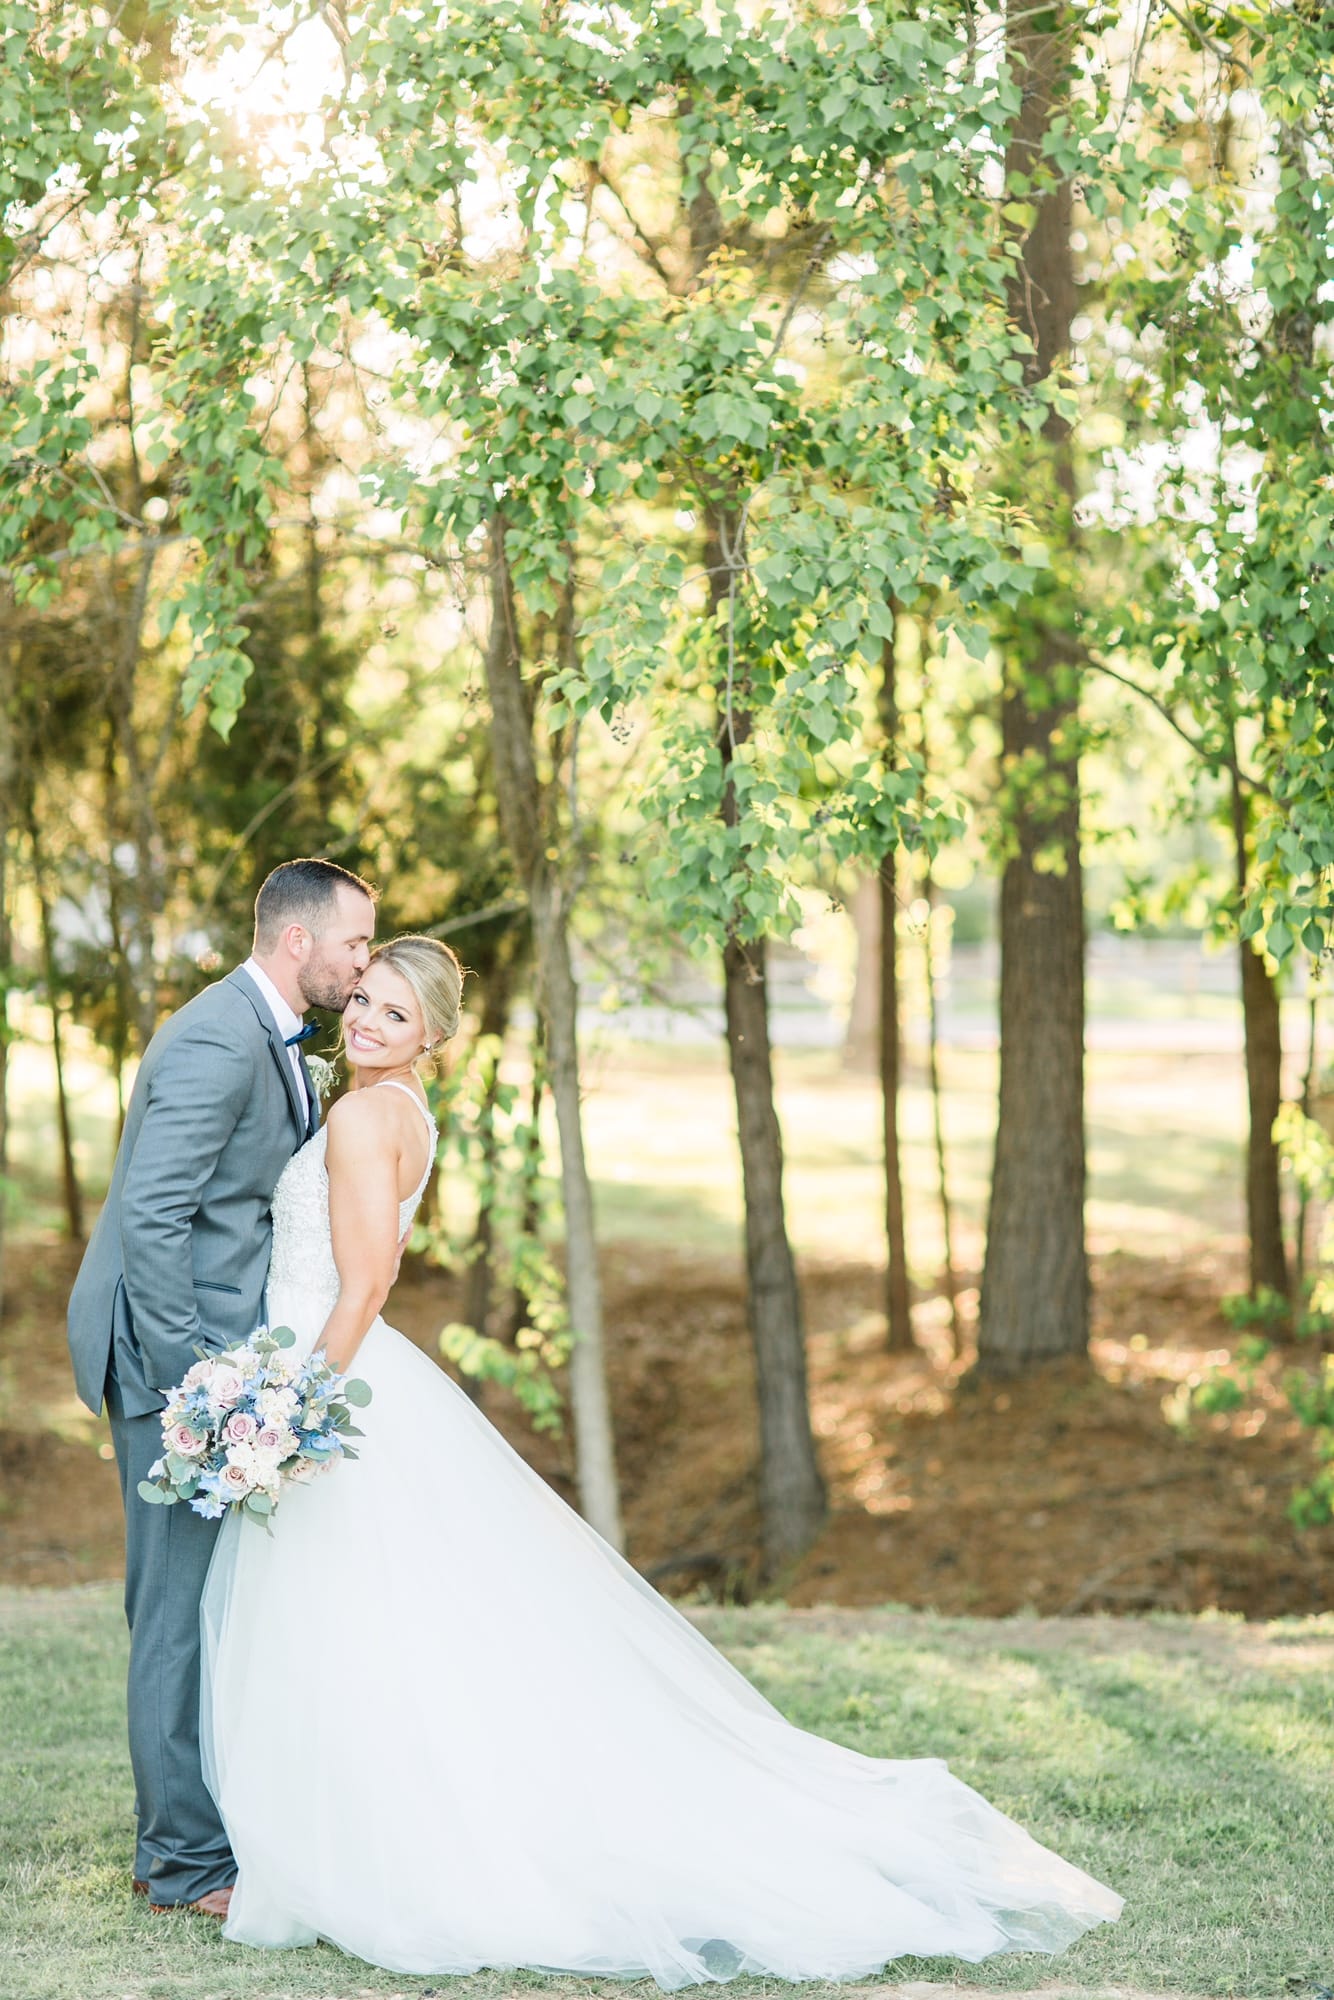 Pretty Summer Wedding And A Princess Ballgown - Maggie Bride wearing Lisette by Maggie Sottero